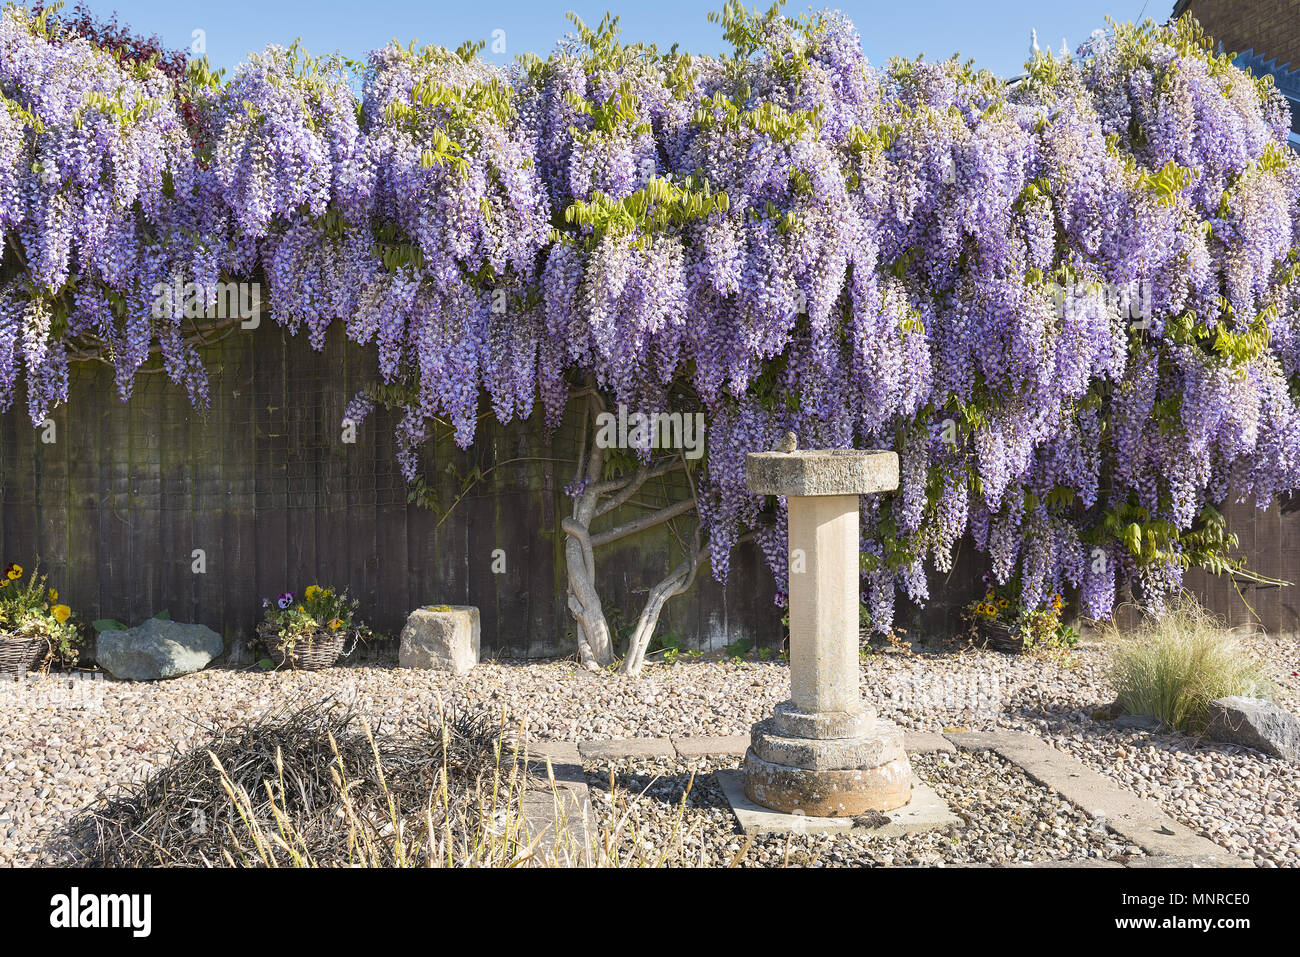 Wisteria shrub in full flower in springtime covering and hiding a garden fence. Stock Photo